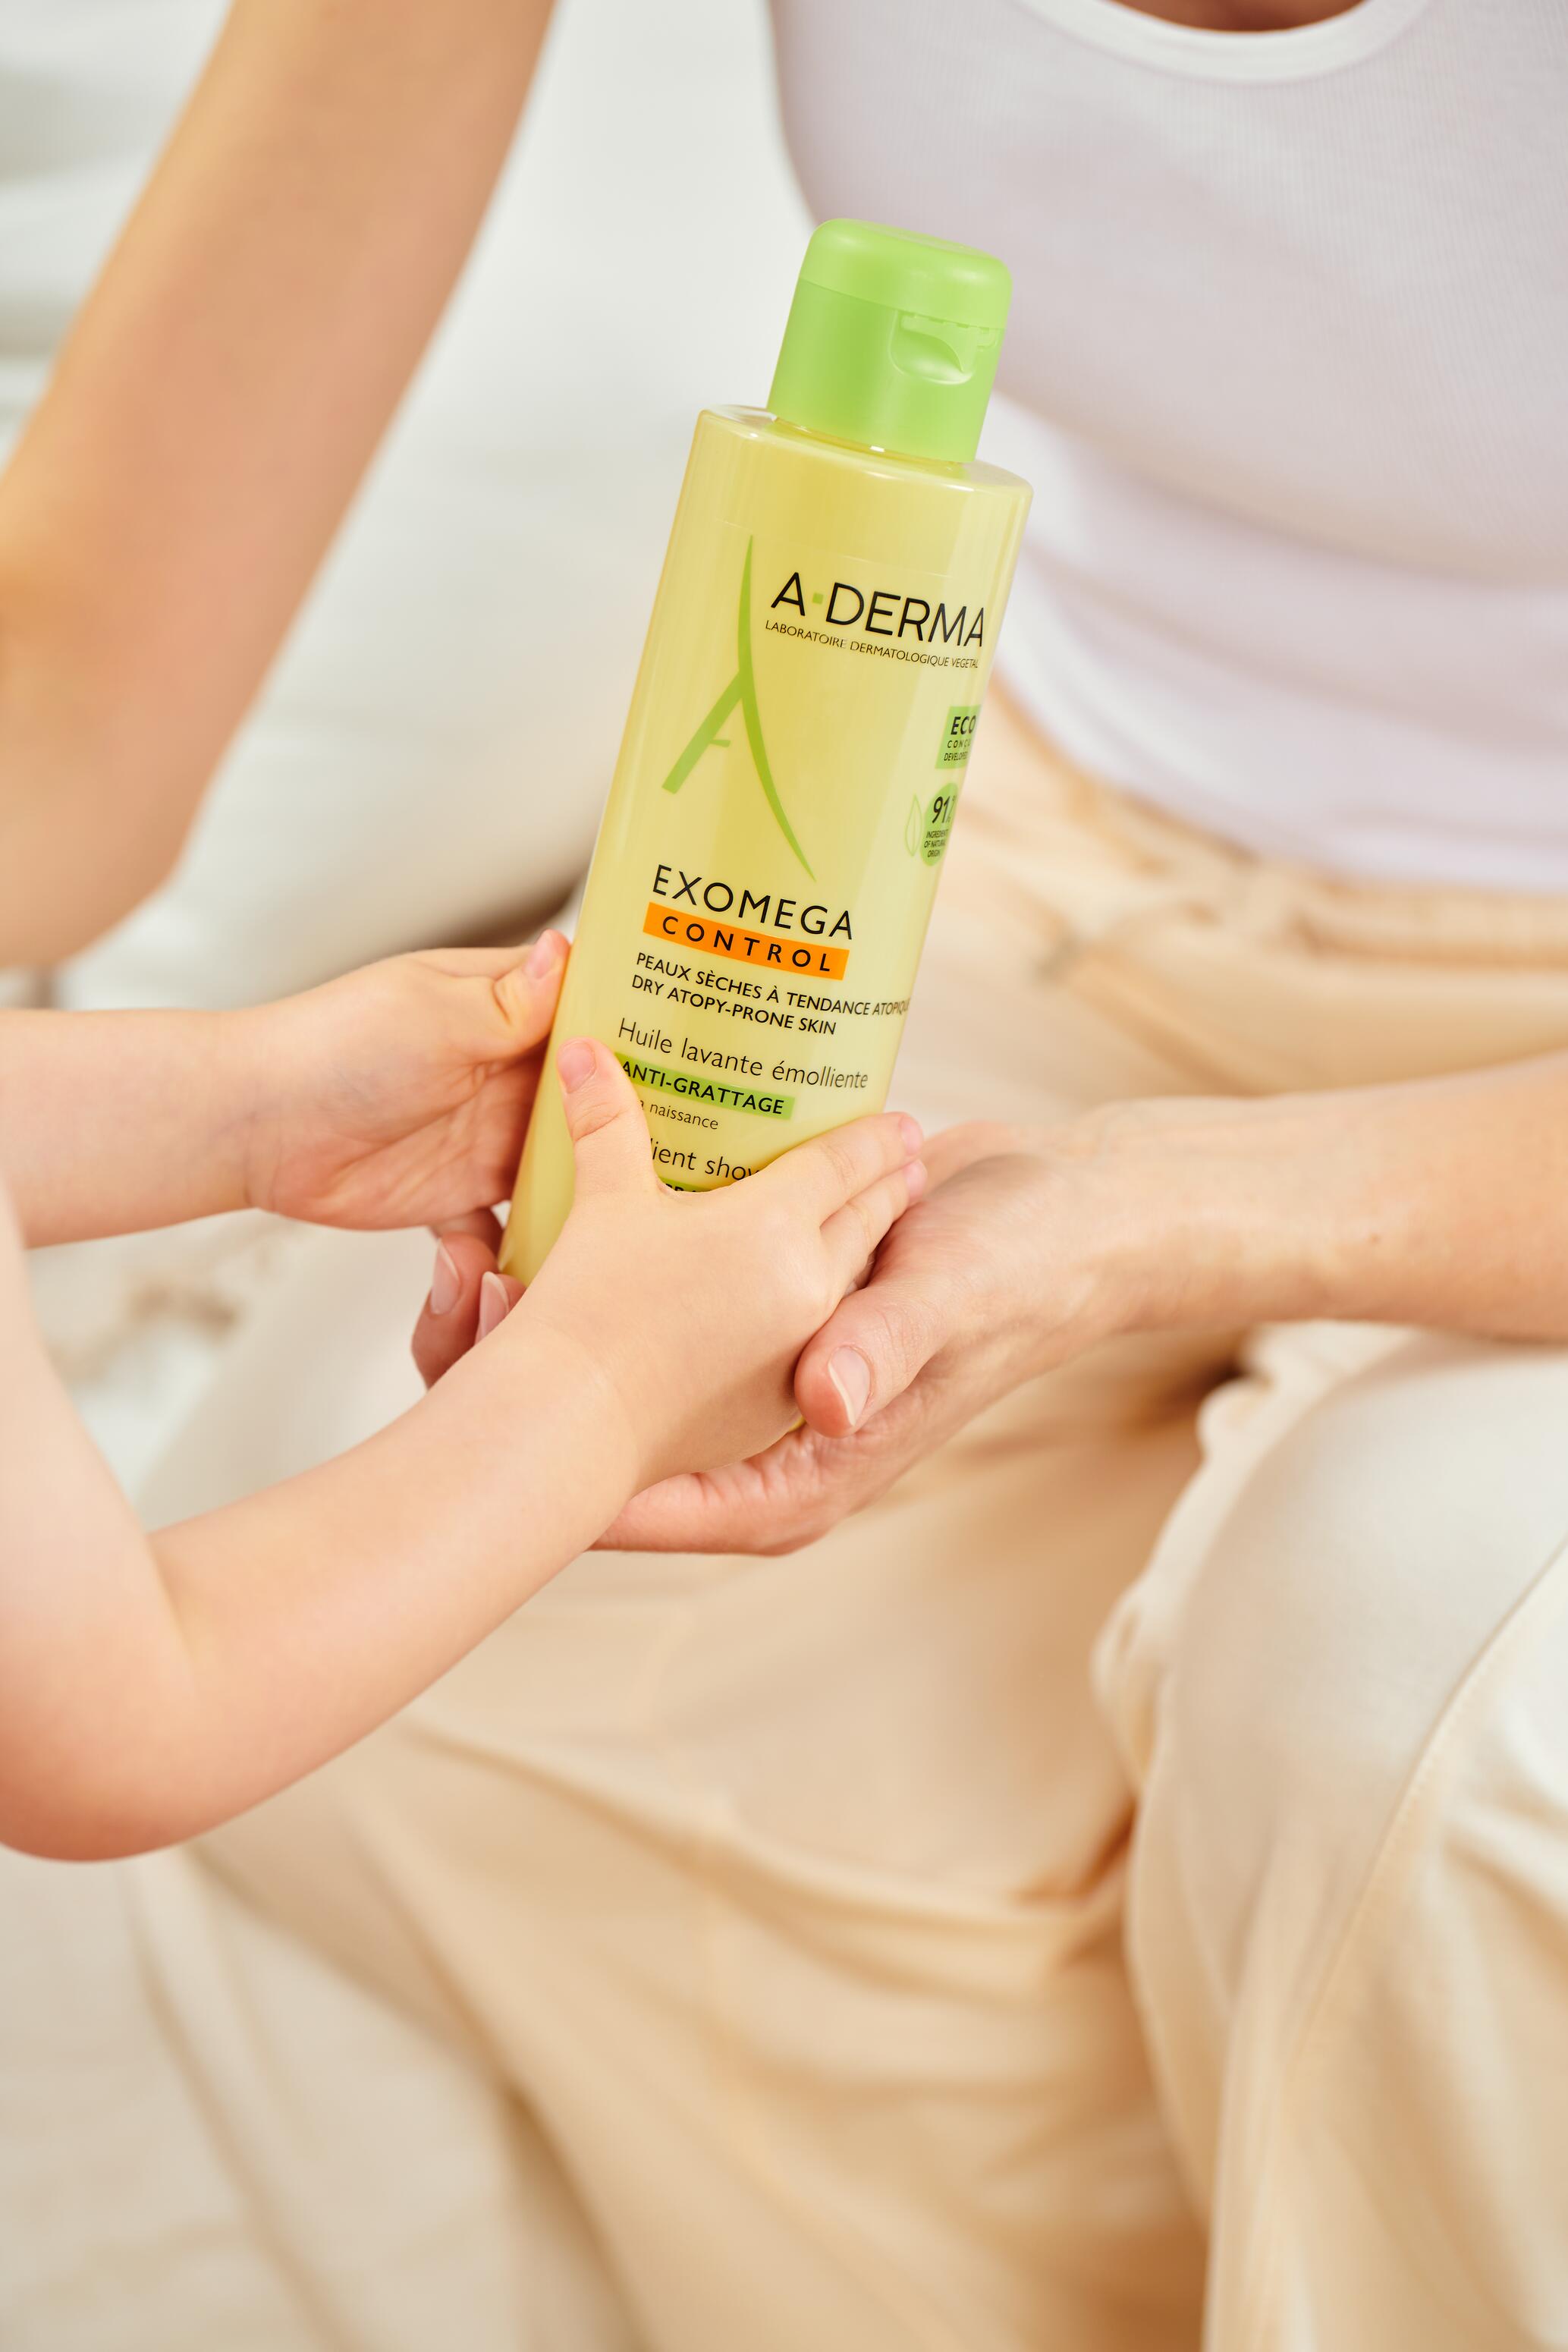 AD_EXOMEGA_SHOWER_OIL_BOY AND MOTHER HANDS_LIFESTYLE_500ML_2022